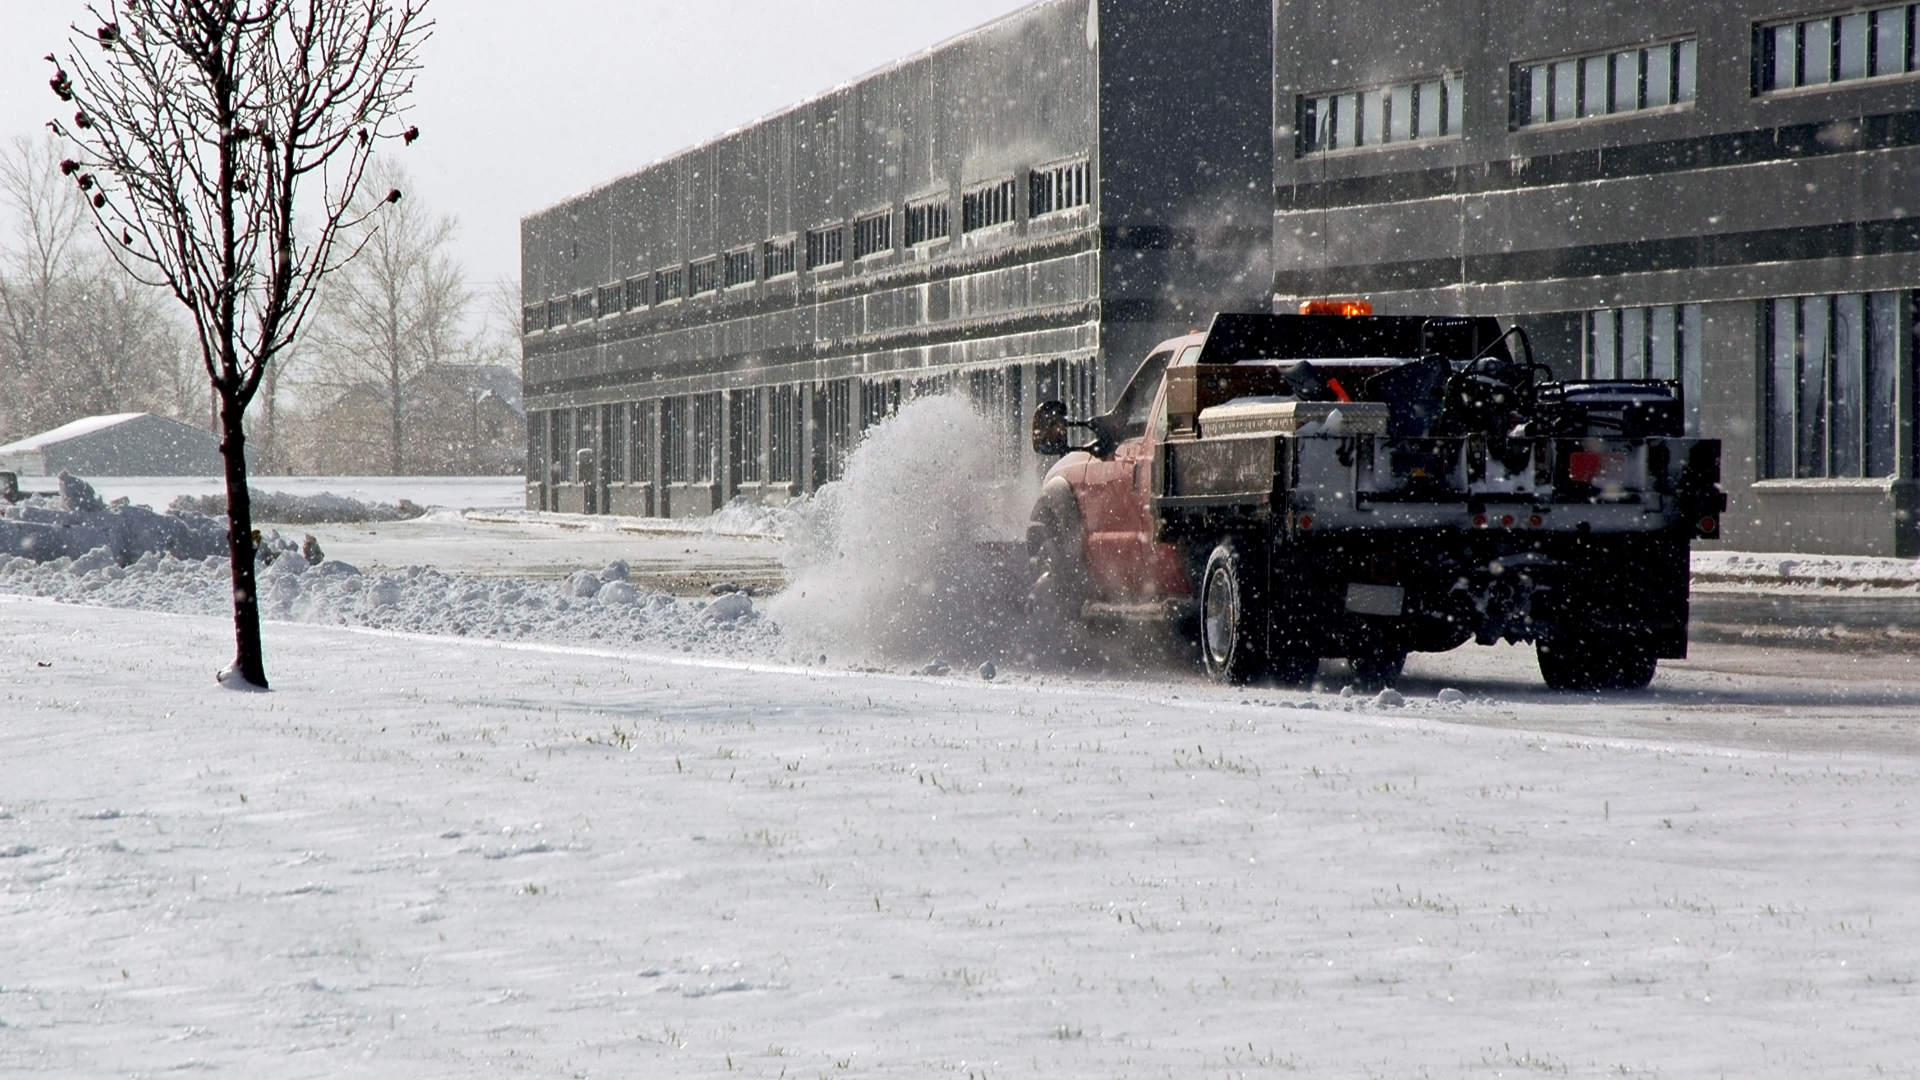 A commercial property being cleared of snow in and around Overland Park, KS.